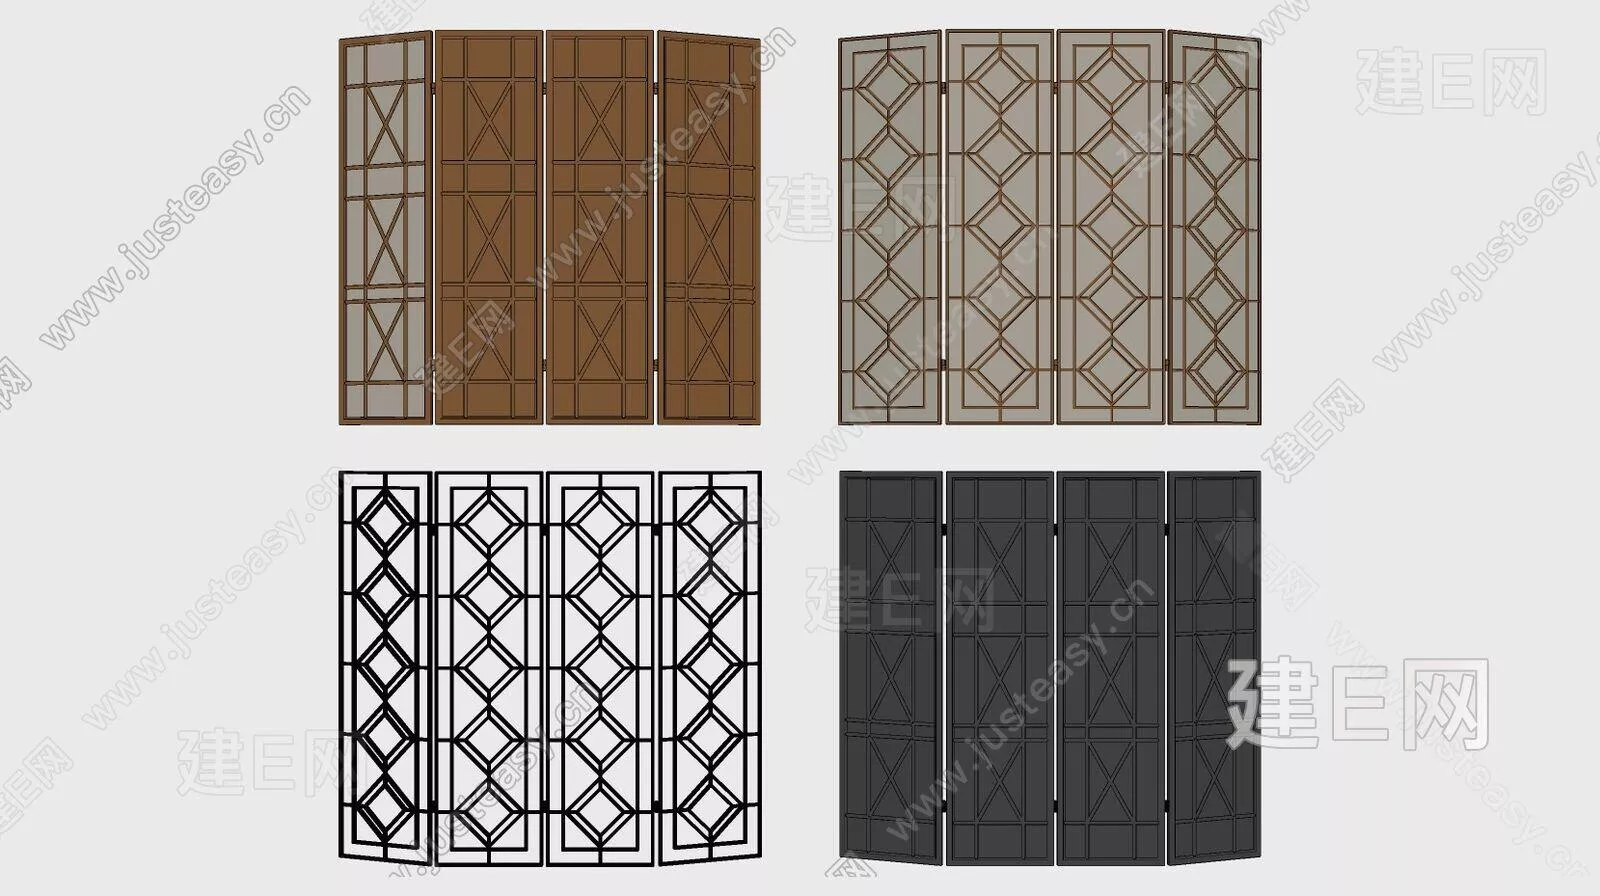 CHINESE PARTITION SCREEN - SKETCHUP 3D MODEL - ENSCAPE - 111755716